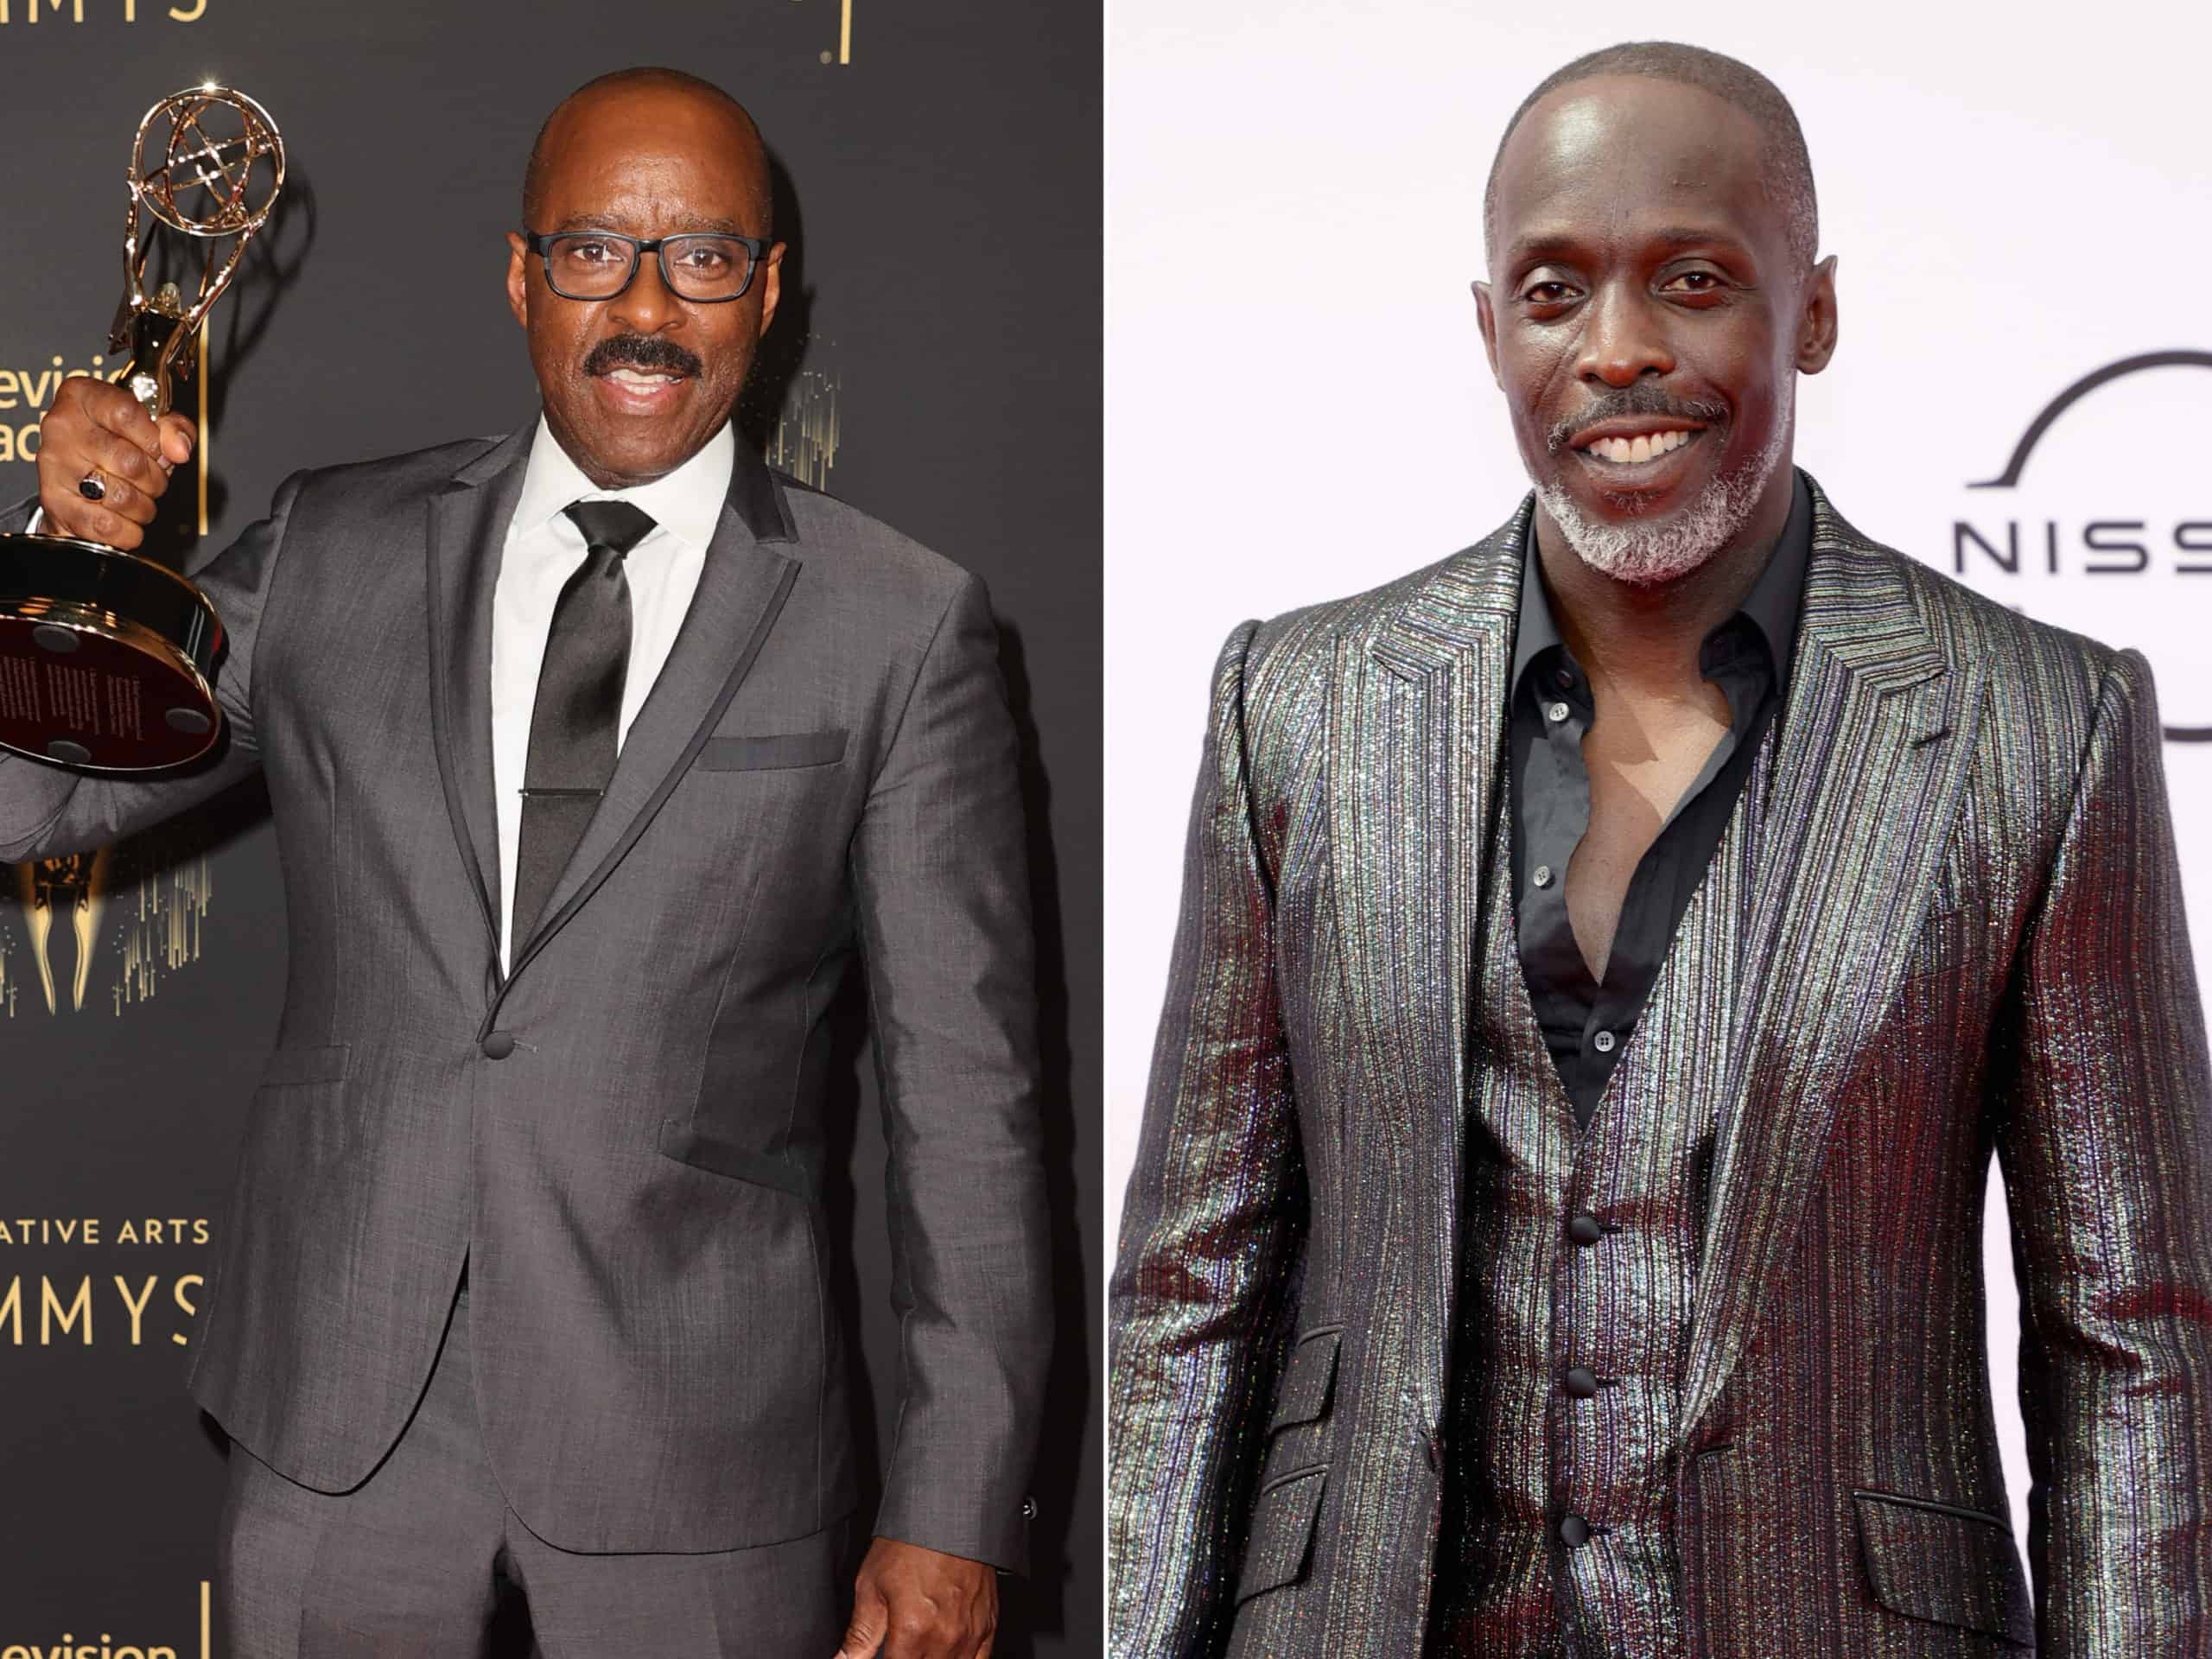 Courtney B. Vance honored her "Lovecraft Country" co-star Michael K. Williams during the 2021 Creative Arts Emmys.